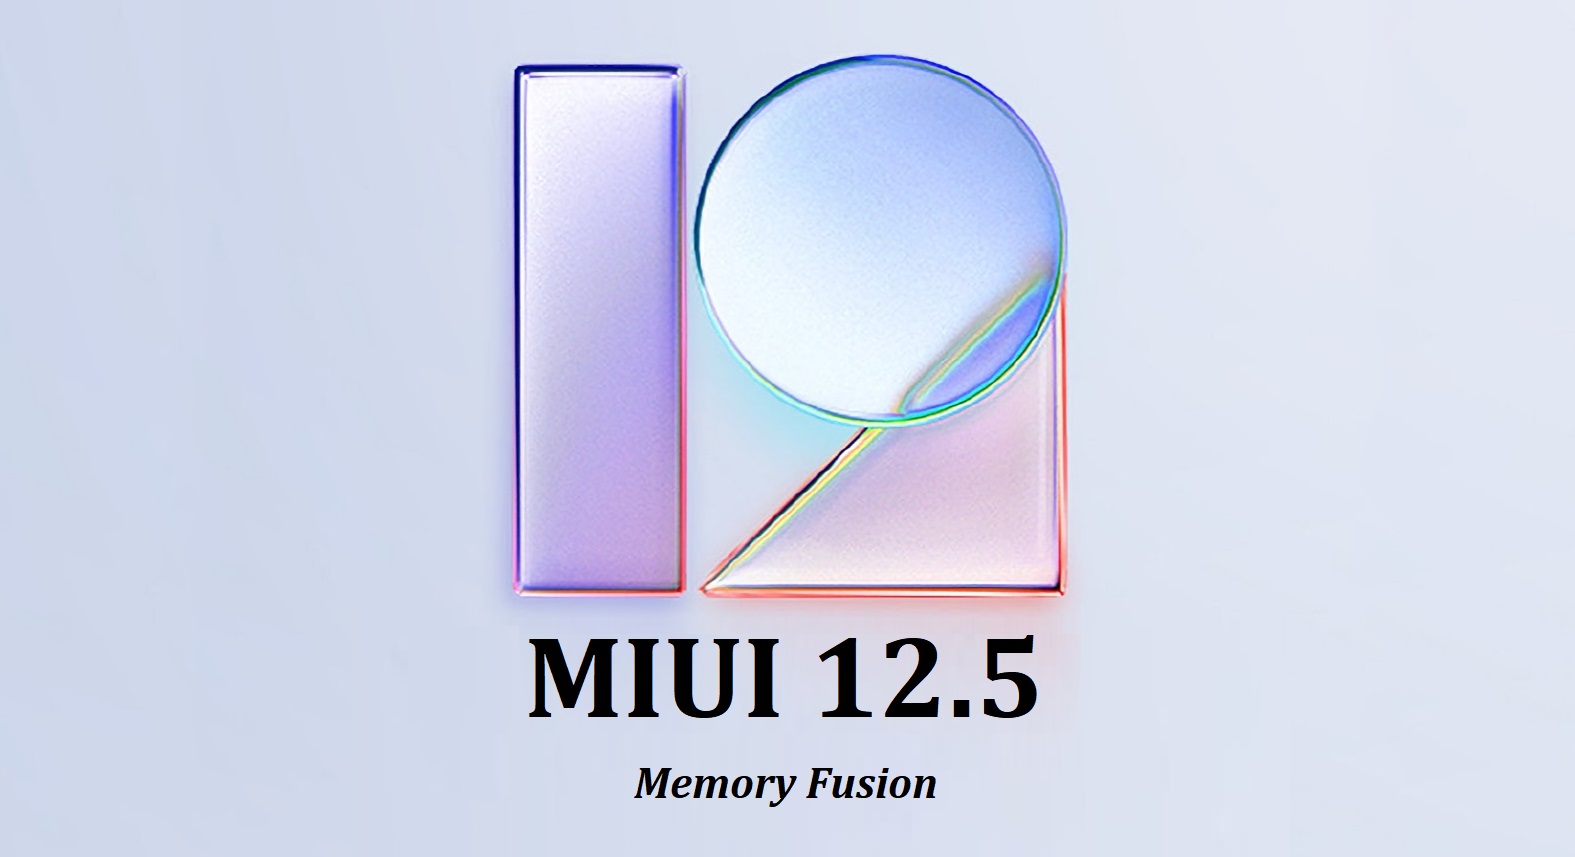 Three Xiaomi smartphones received RAM expansion feature in MIUI 12.5